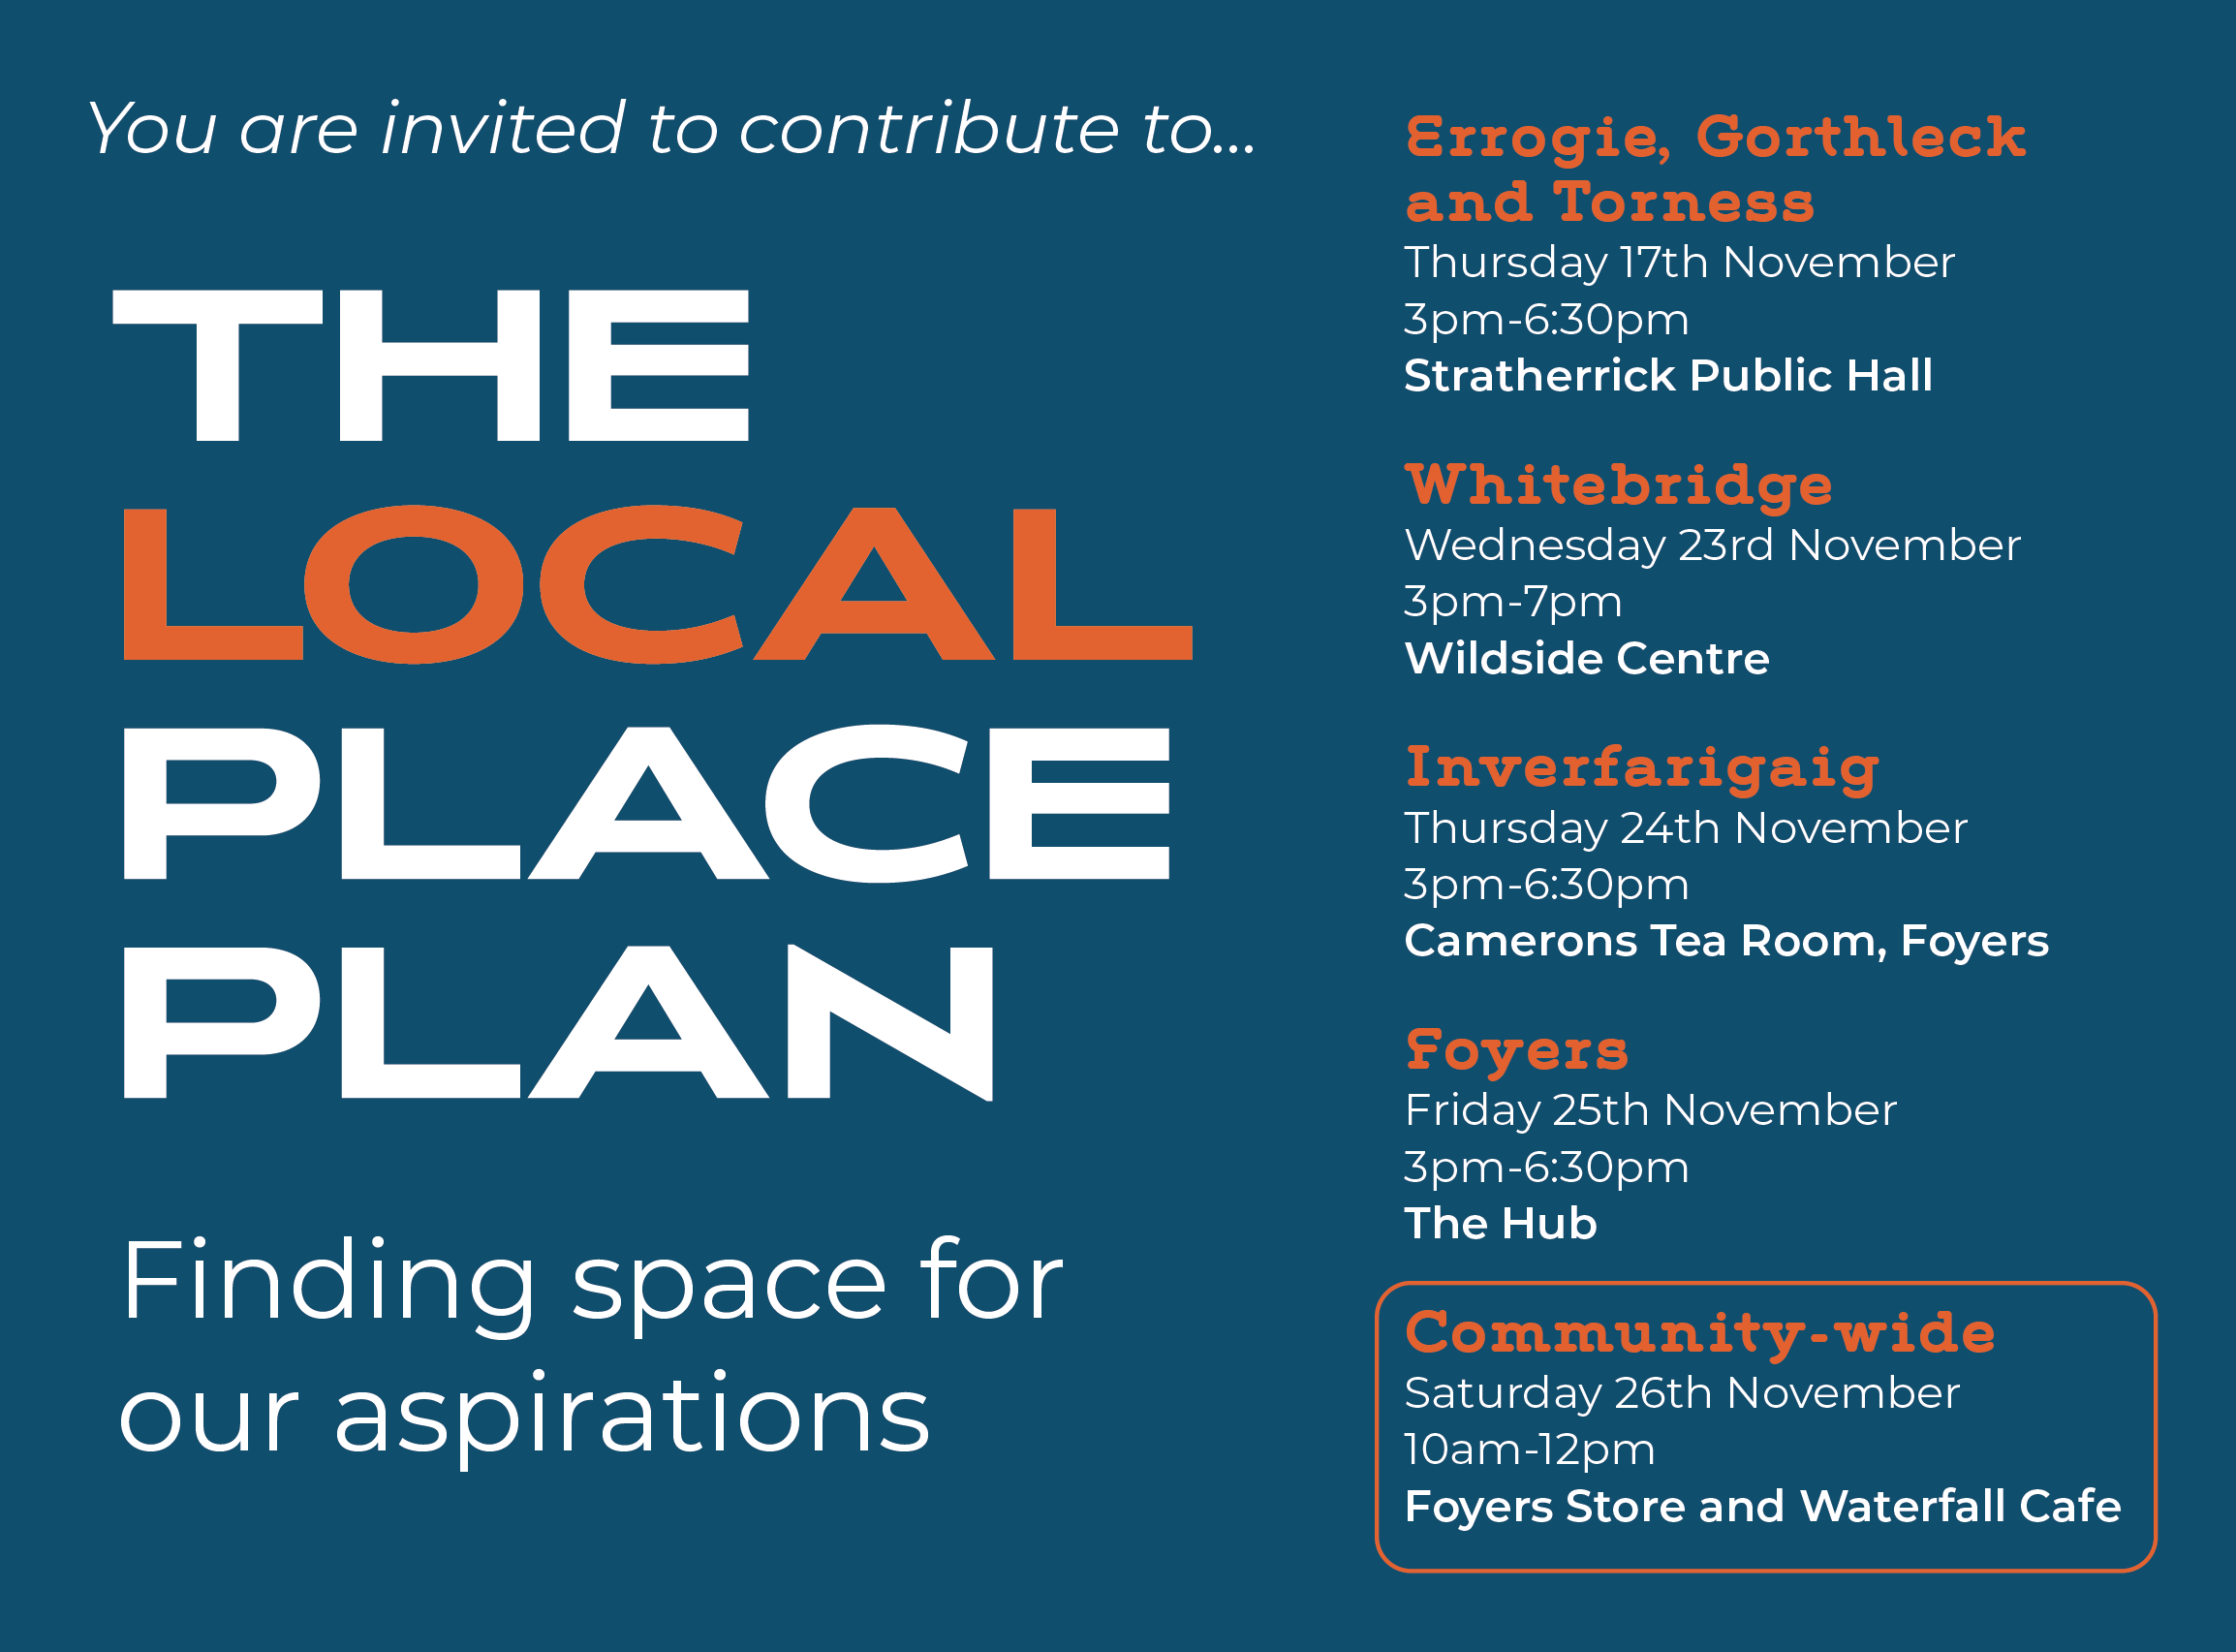 The local place plan: finding space for your aspirations